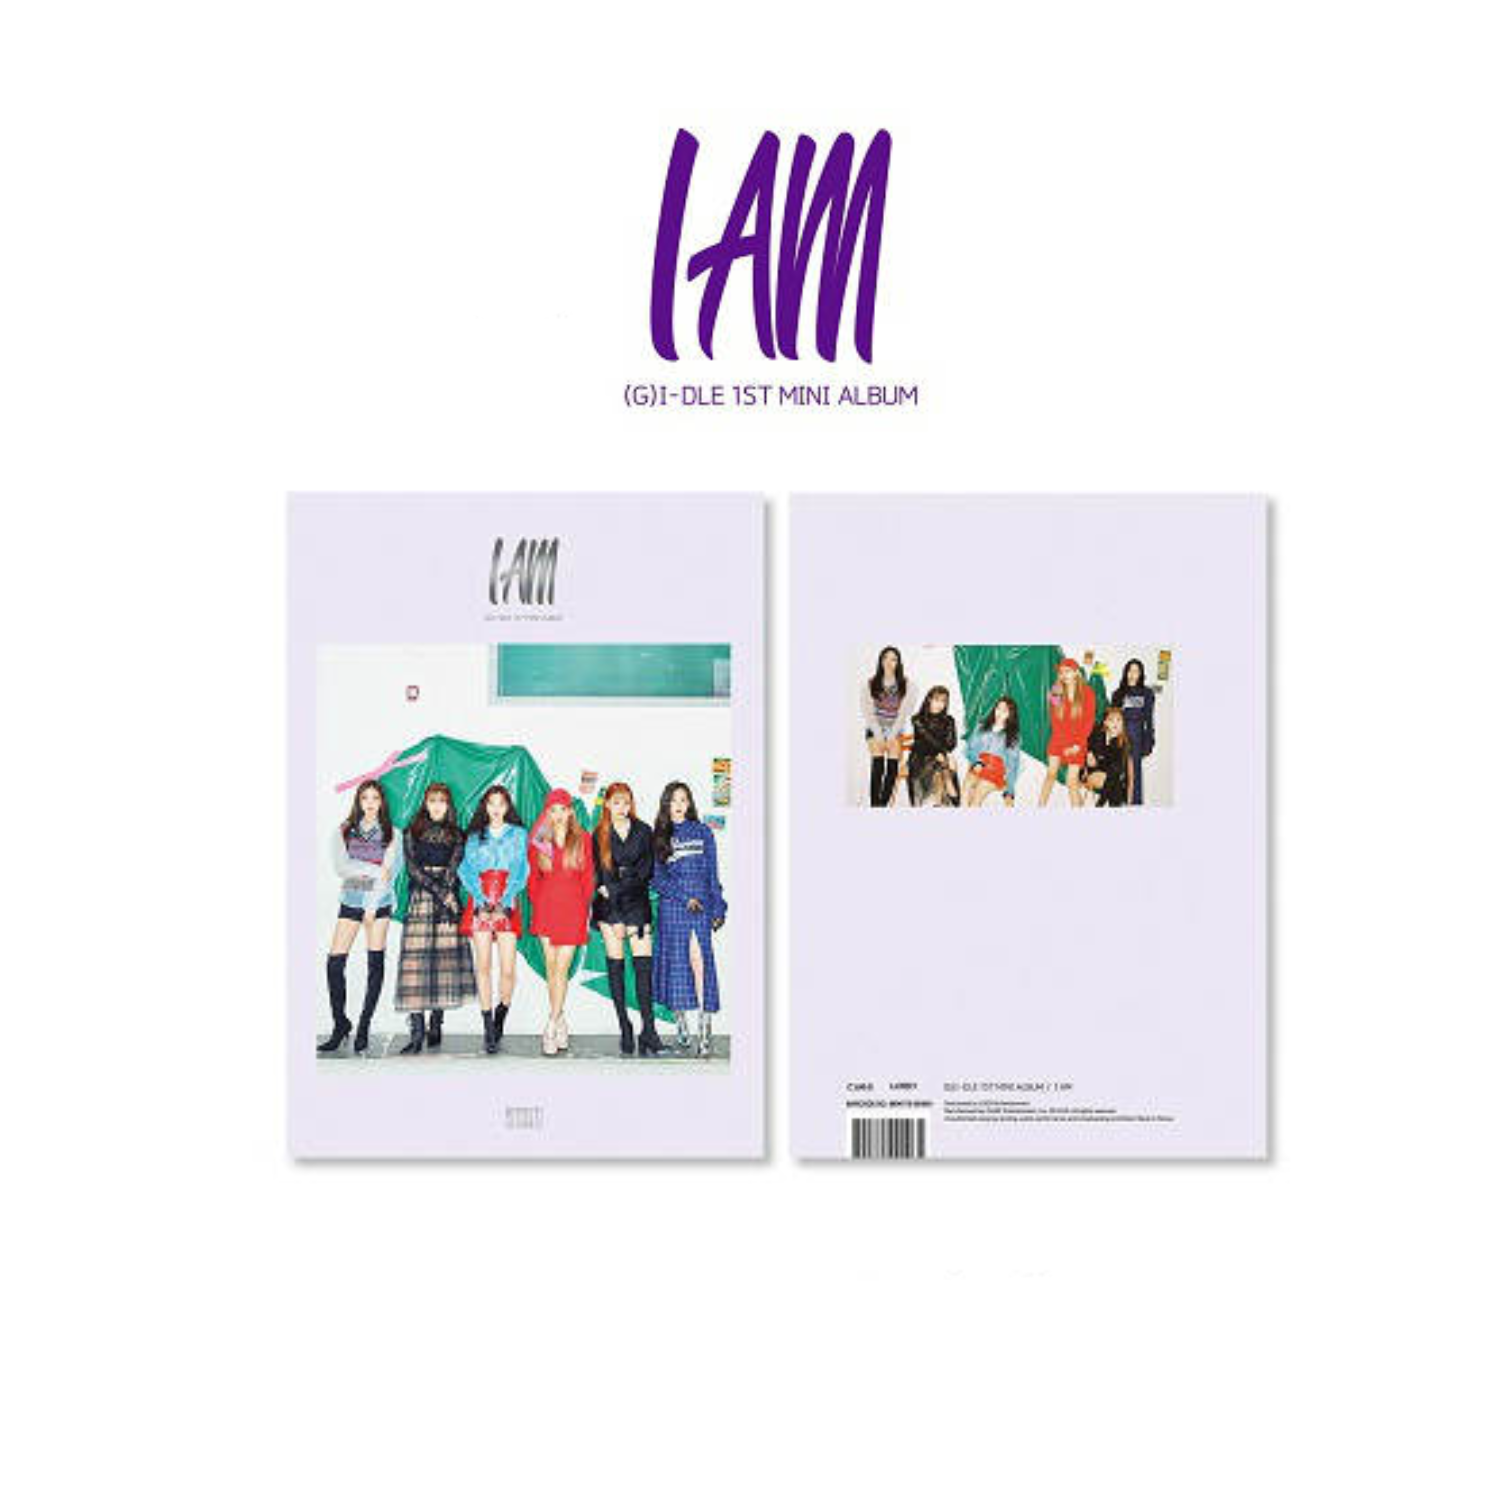 (G)I-DLE : I AM